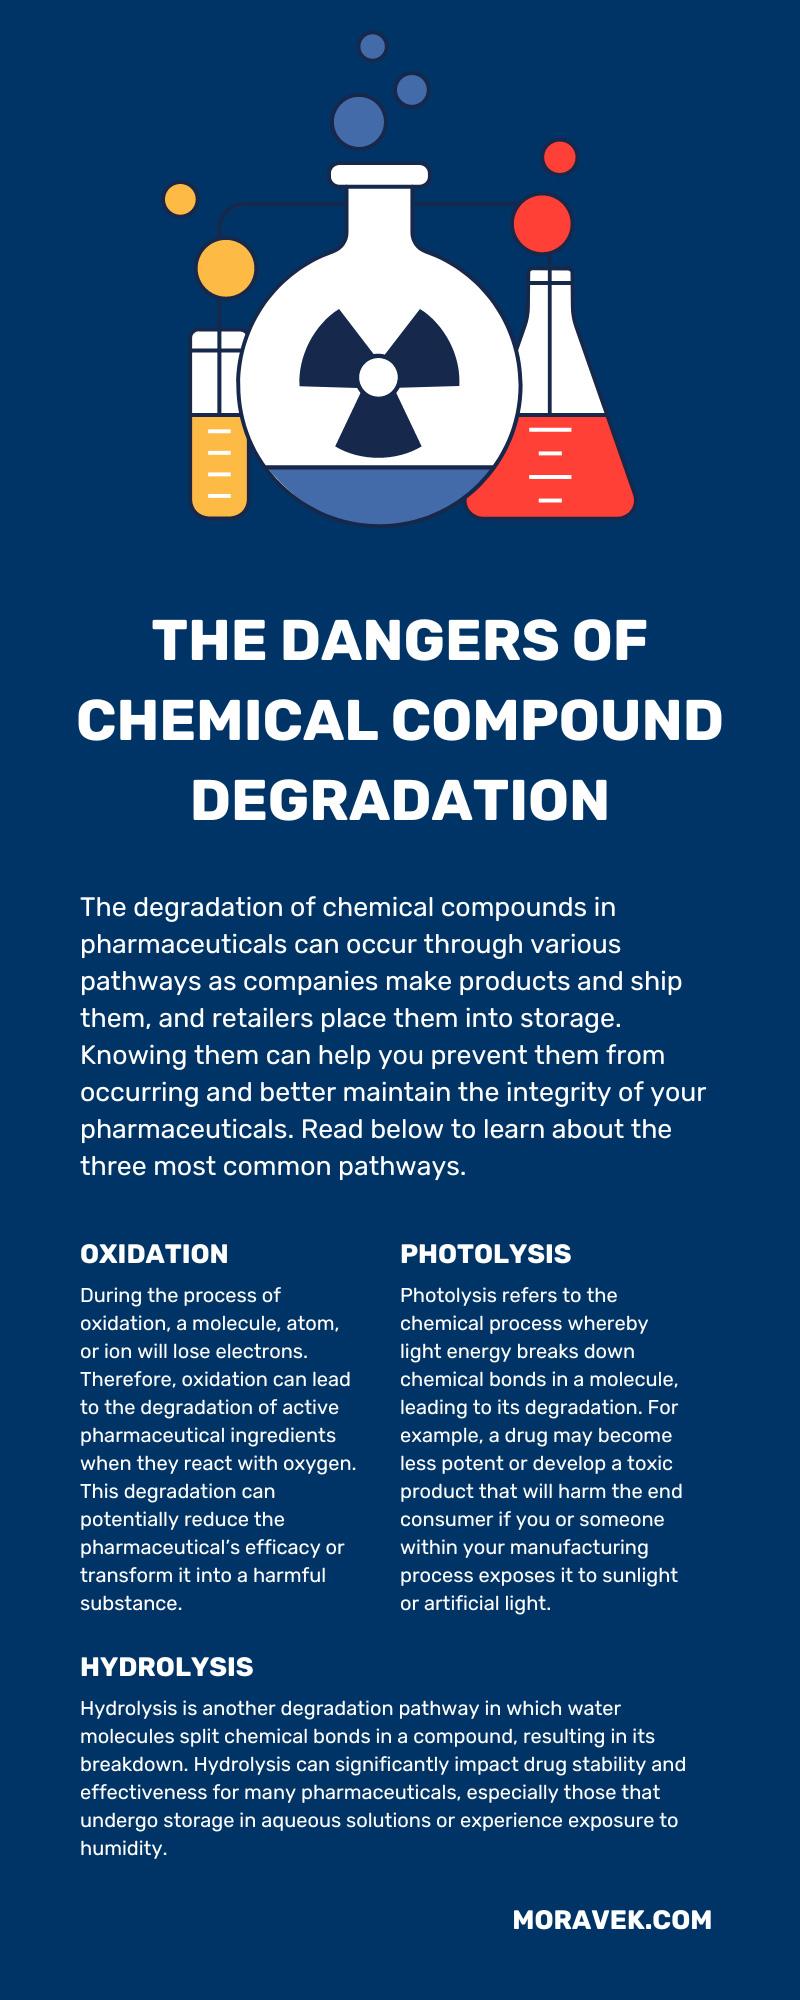 The Dangers of Chemical Compound Degradation